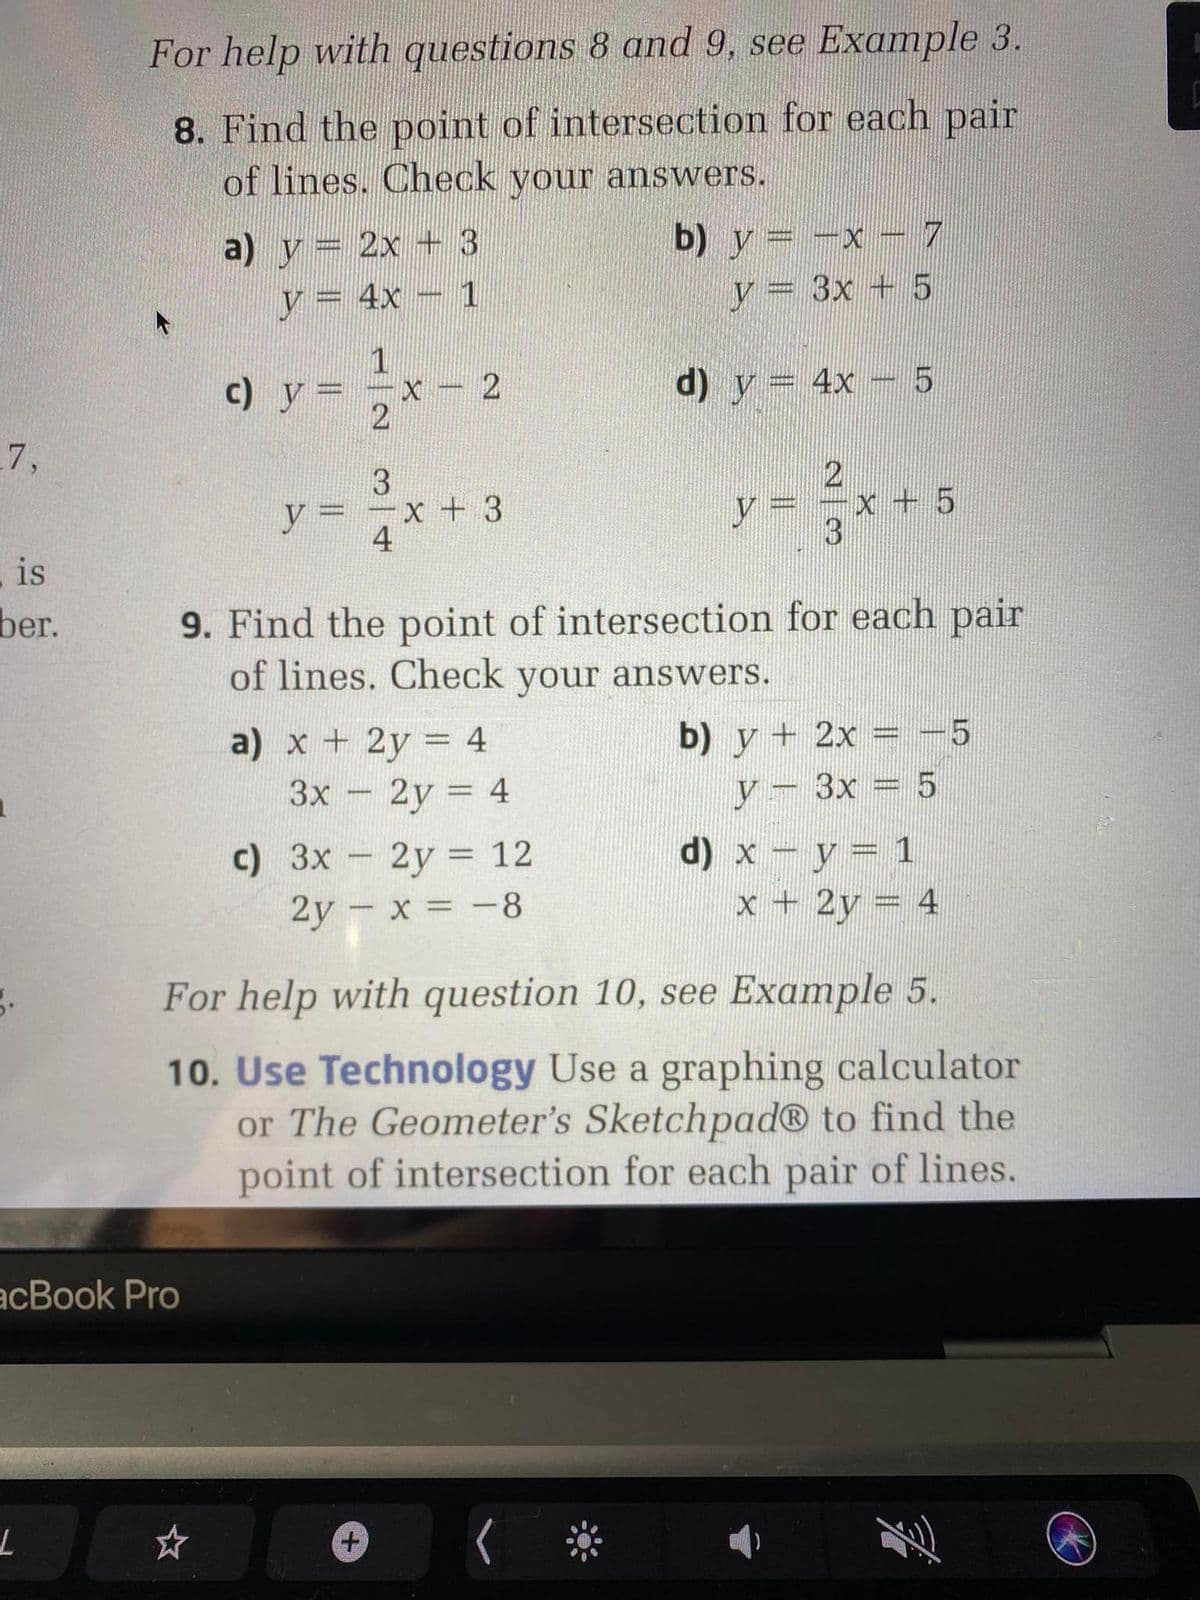 For help with questions 8 and 9, see Example 3.
8. Find the point of intersection for each pair
of lines. Check vour answers.
a) y= 2x + 3
4x- 1
b) y= -x -7
y = 3x + 5
1
c) y =
d) y = 4x – 5
7,
3.
y 3D
y%3=
y = -x + 5
4
is
ber.
9. Find the point of intersection for each pair
of lines. Check your answers.
a) х + 2у 3D 4
Зх - 2у %3D 4
b) y + 2x = -5
y- 3x = 5
с) Зх - 2у %3D 12
2y – x = -8
d) x - y= 1
x + 2y = 4
|
For help with question 10, see Example 5.
10. Use Technology Use a graphing calculator
or The Geometer's Sketchpad® to find the
point of intersection for each pair of lines.
acBook Pro
2.
